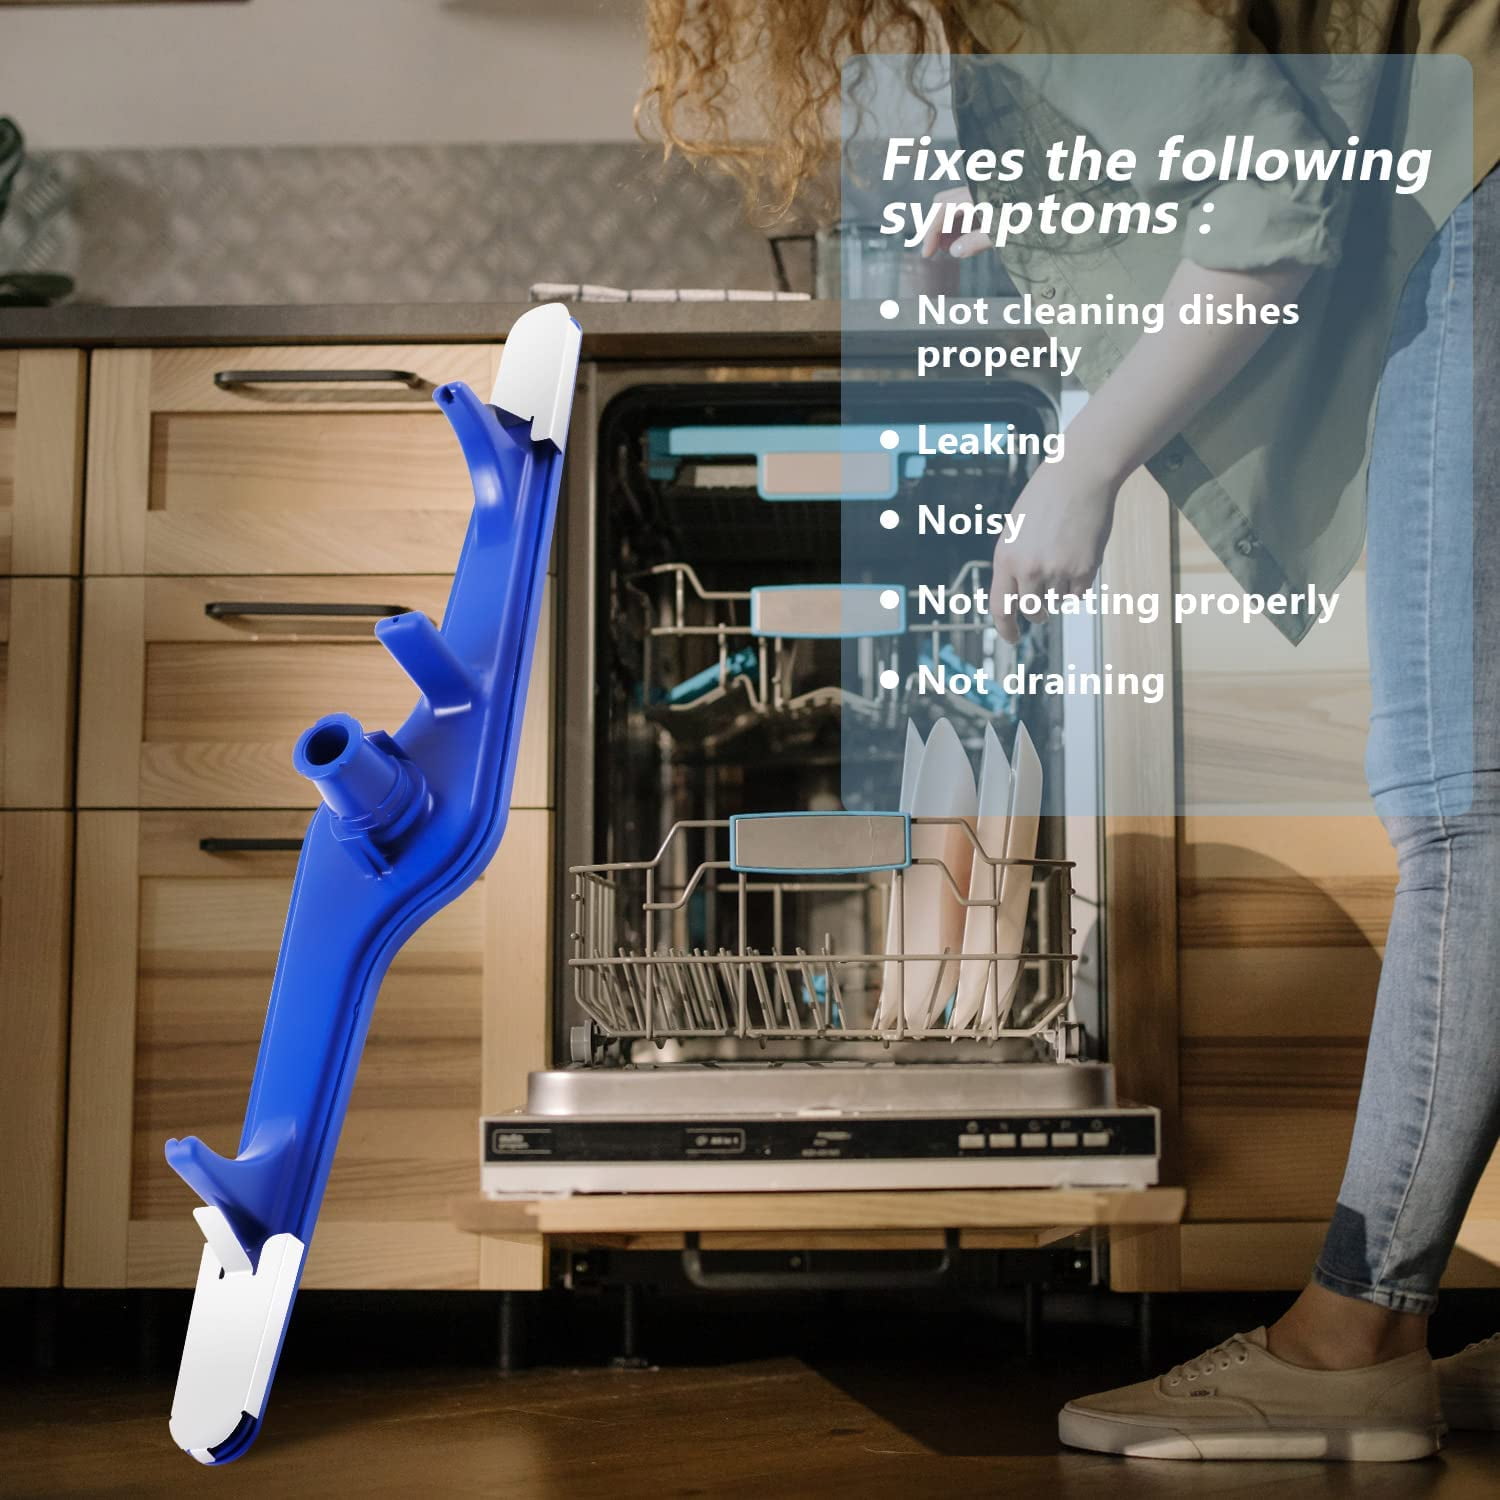 Can You Wash Clothes in a Dishwasher? (5 Forewarnings) - Prudent Reviews